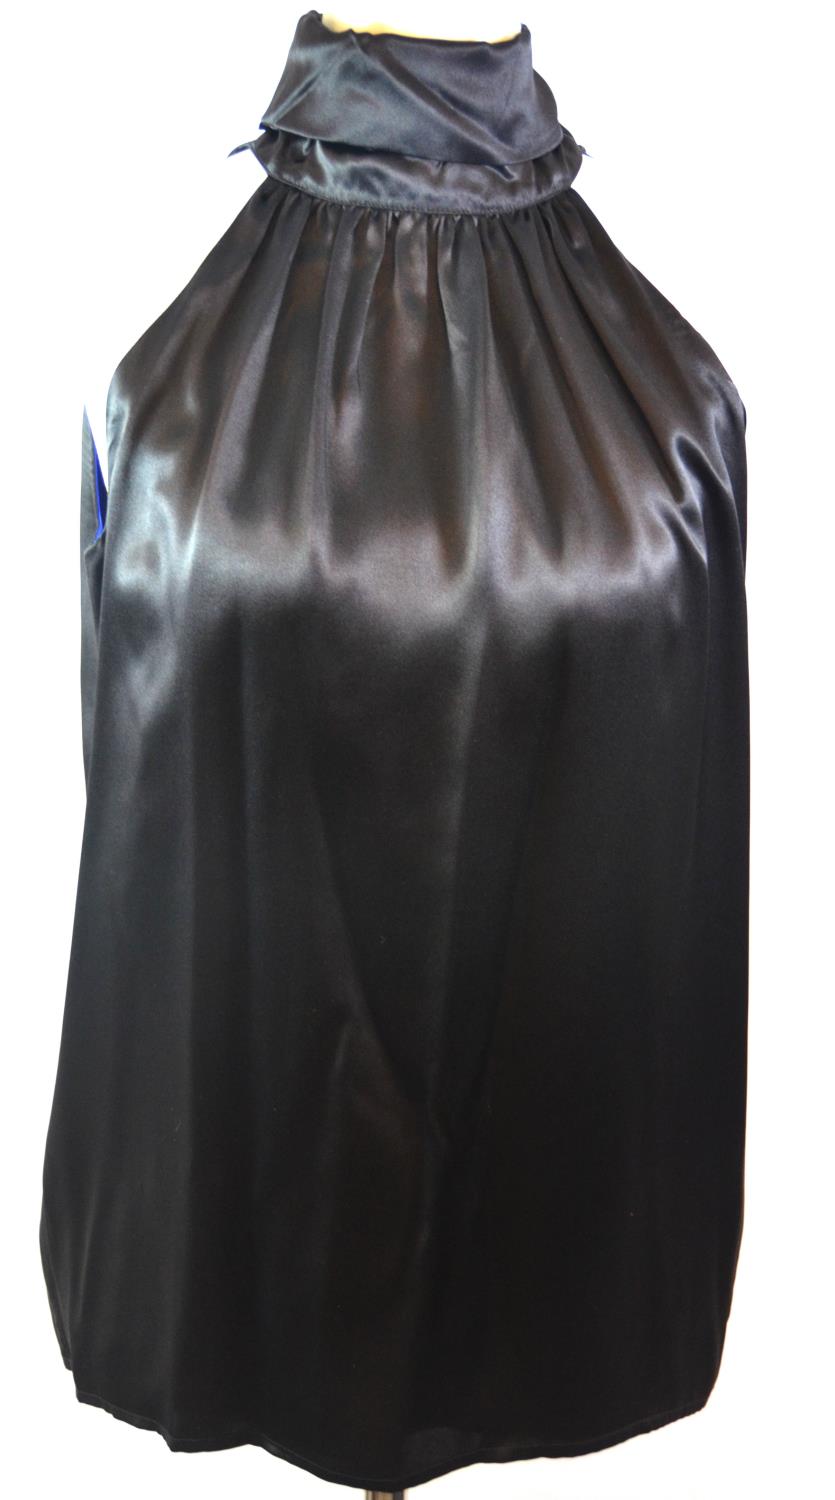 CHER MICHEAL KLEIN, BLACK SILK TOP High neck, sleeveless with Royal blue lining (size 40). A